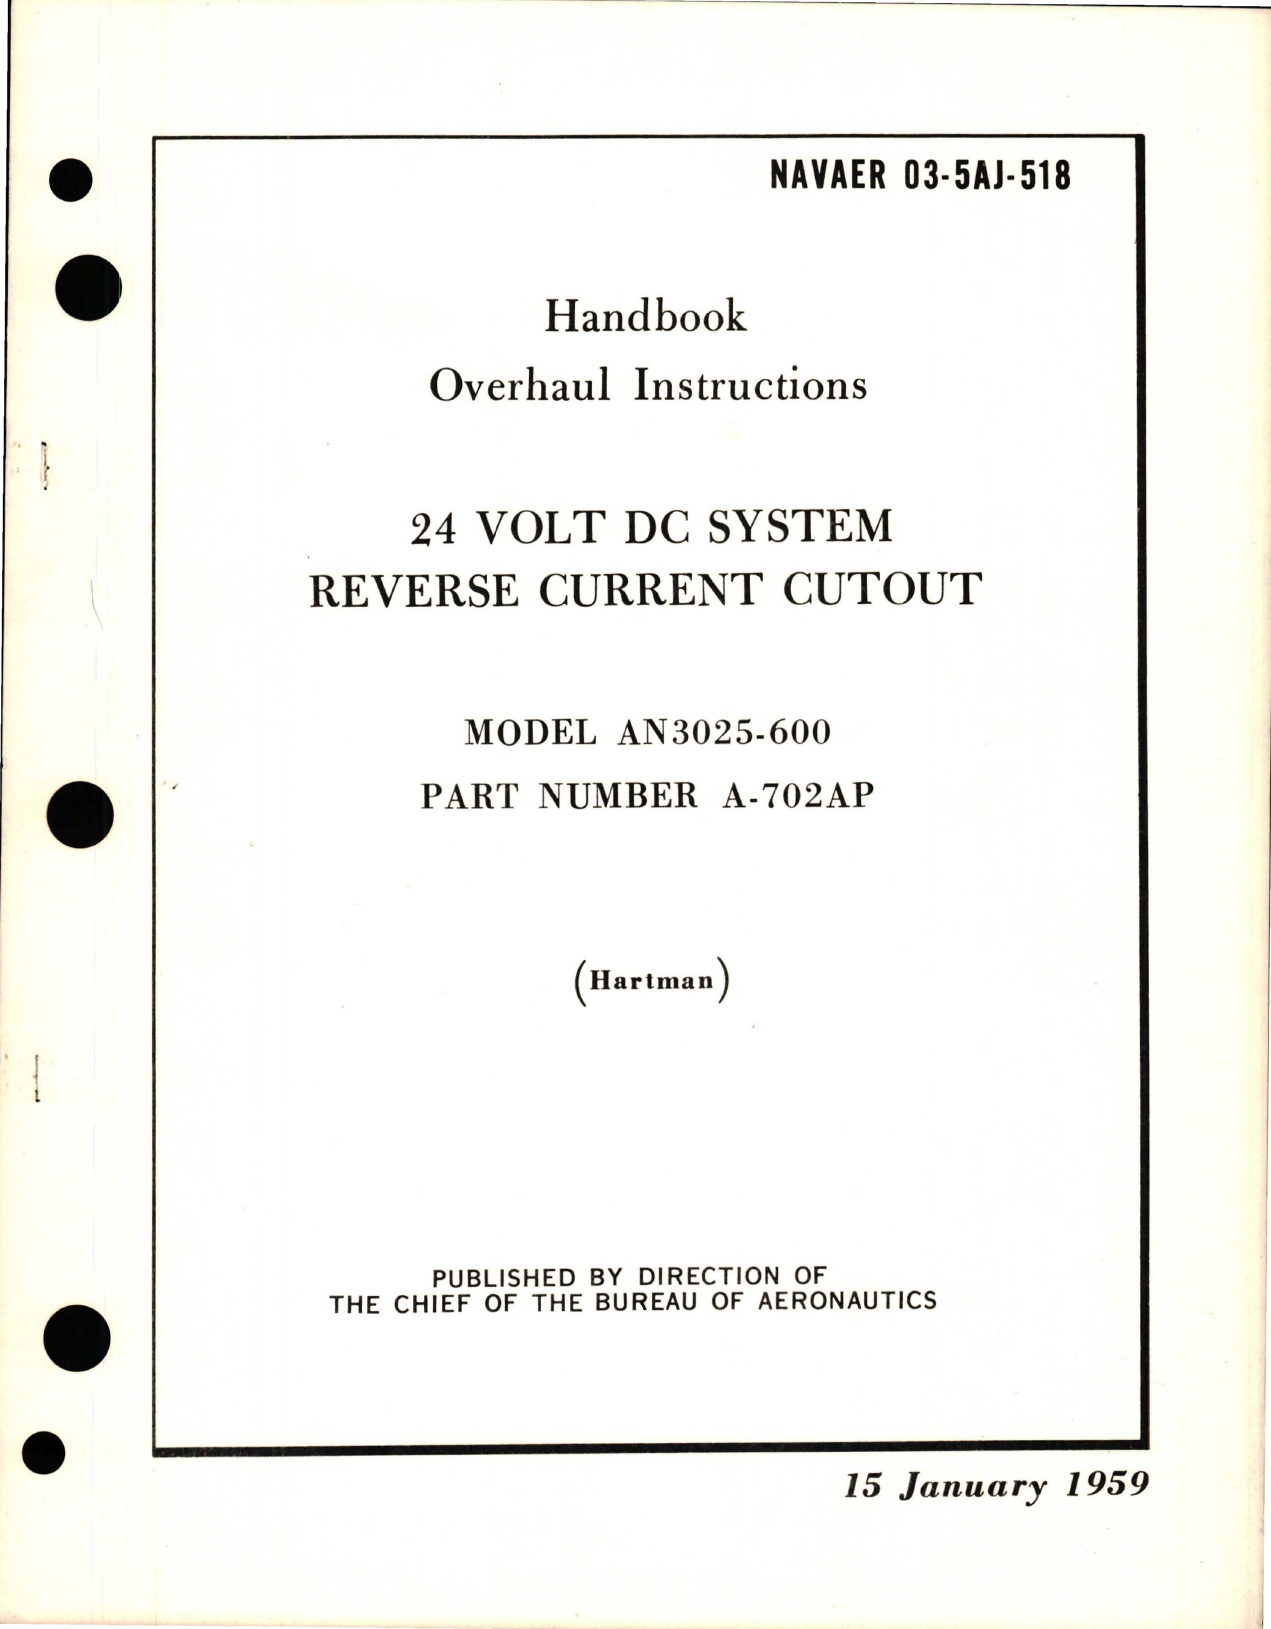 Sample page 1 from AirCorps Library document: Overhaul Instructions for 24 Volt DC System Reverse Current Cutout - Model AN3025-600  - Part A-702AP 